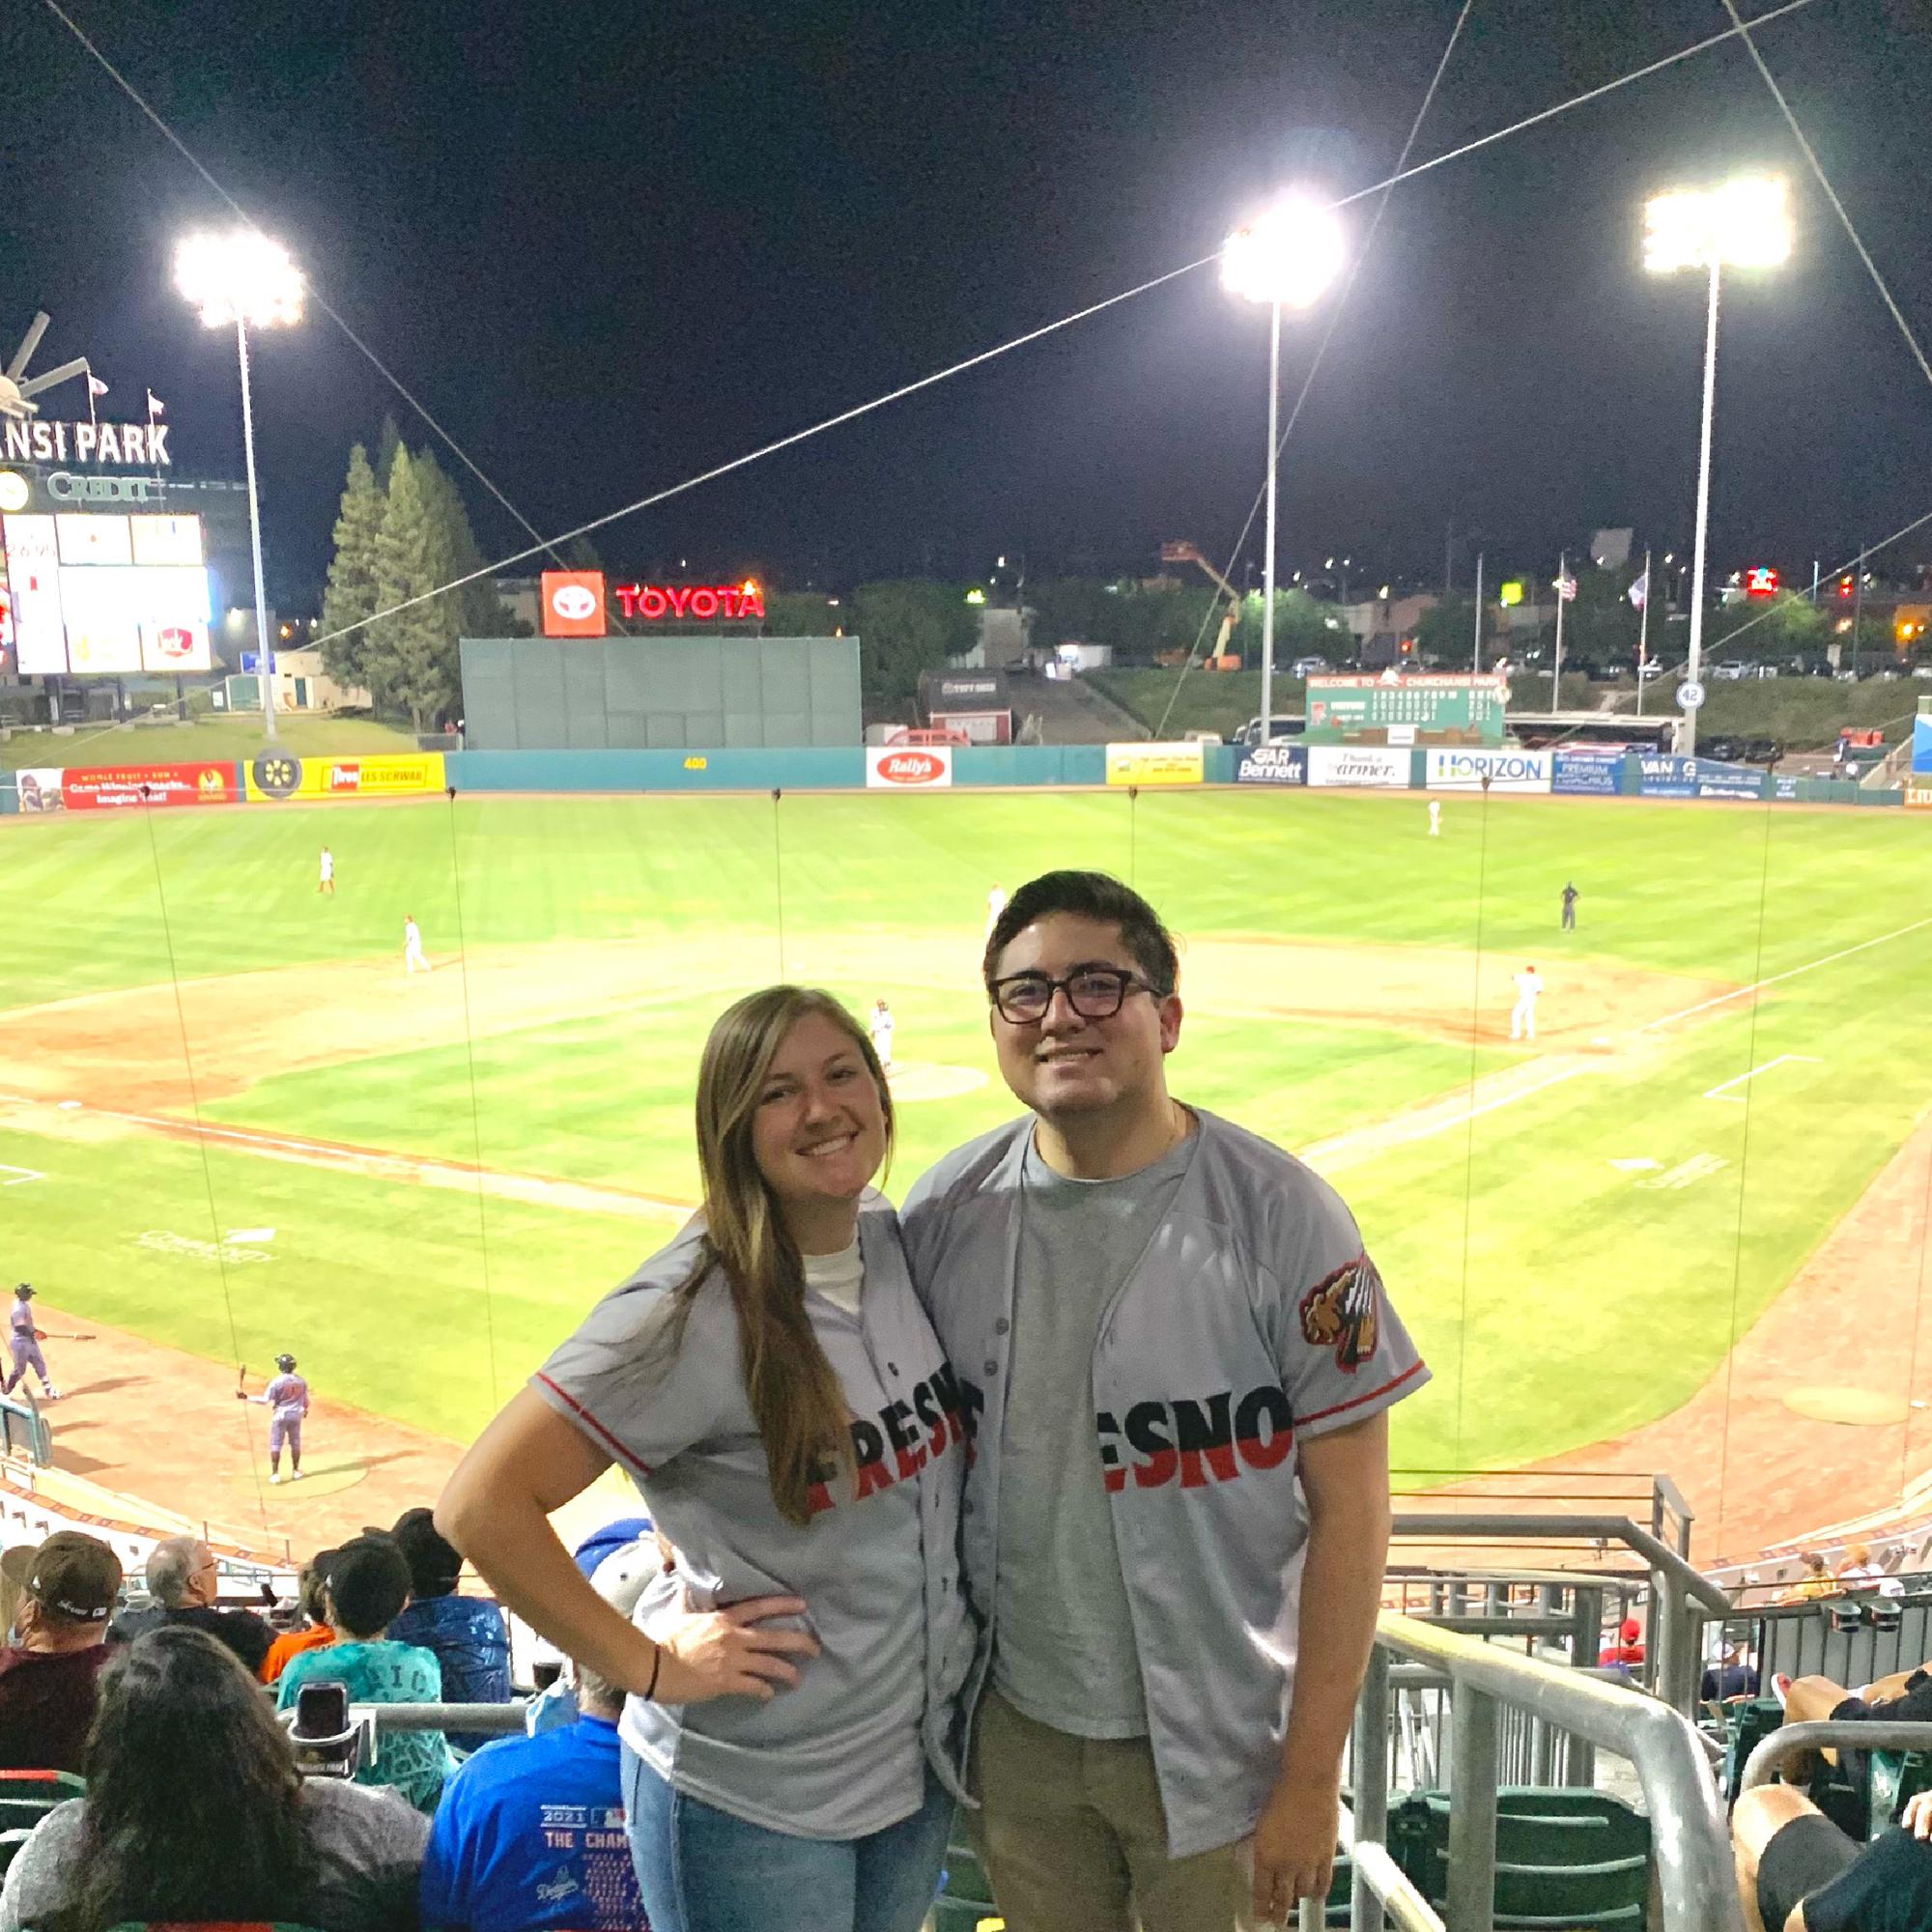 Fresno Grizzlies! Matchy matchy.